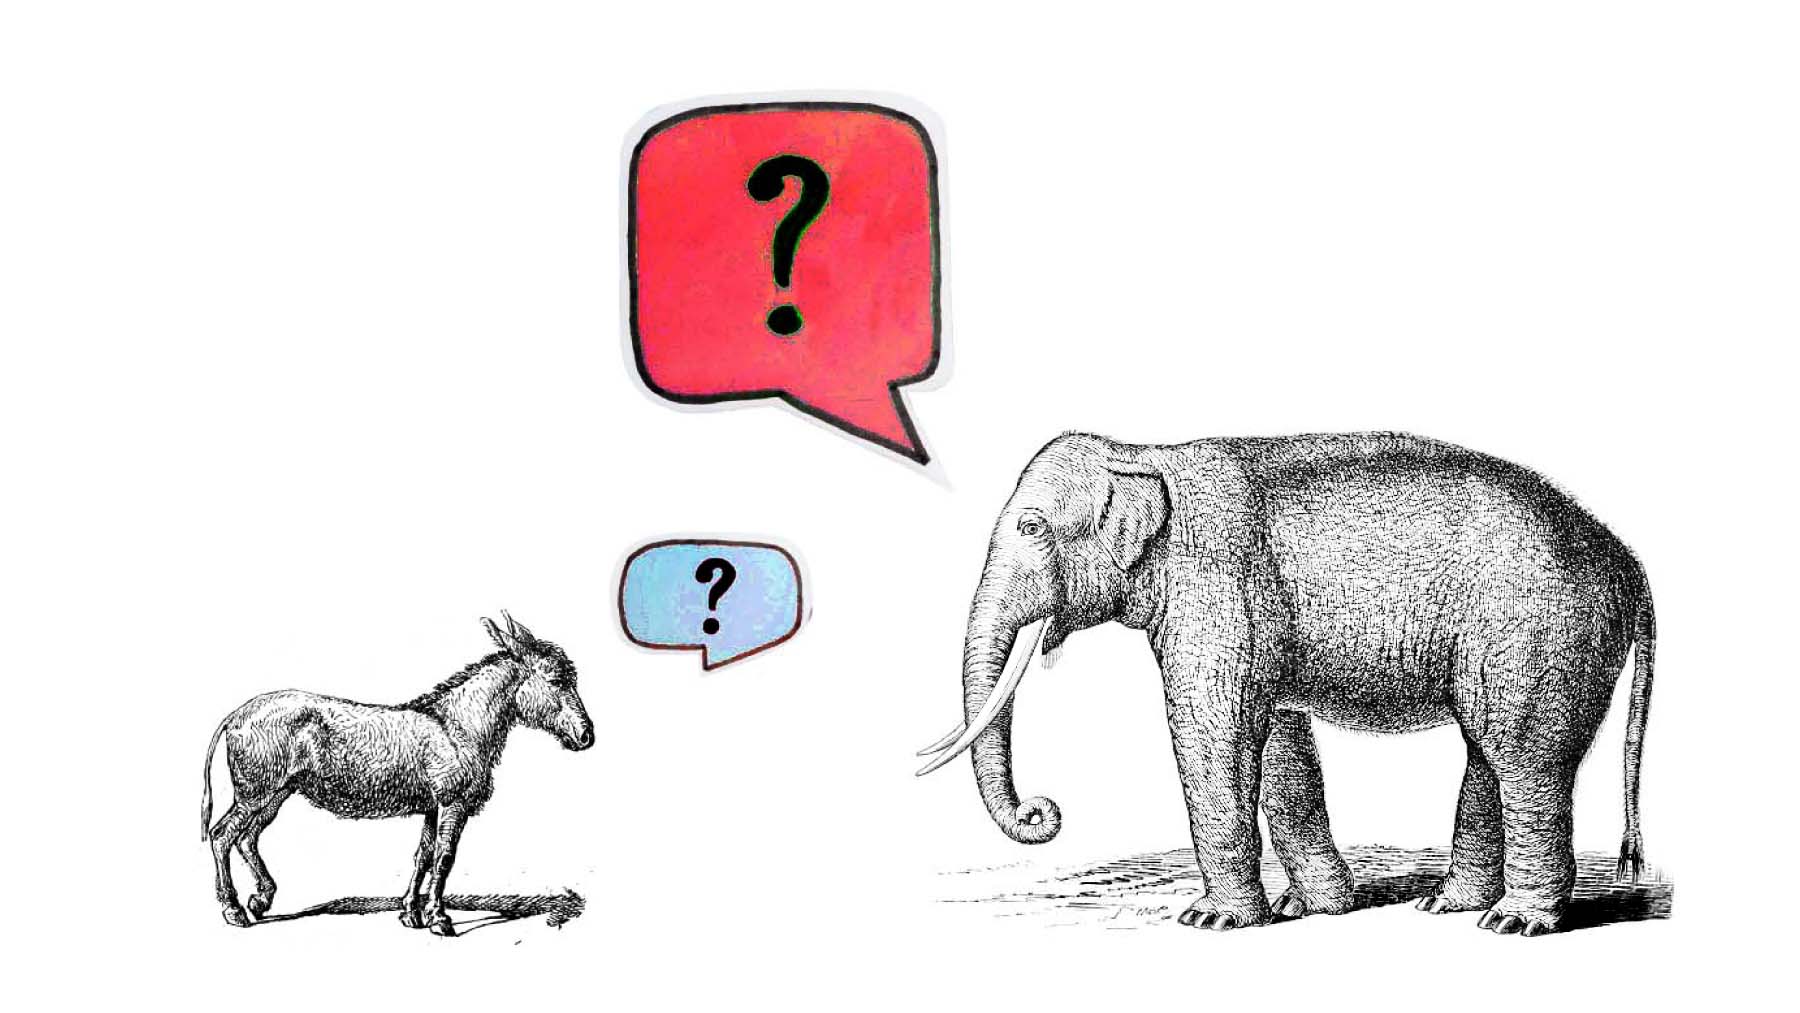 An illustration shows a small donkey with a blue question mark over its head, on the left, and a larger elephant, with a larger red question mark, on the right.